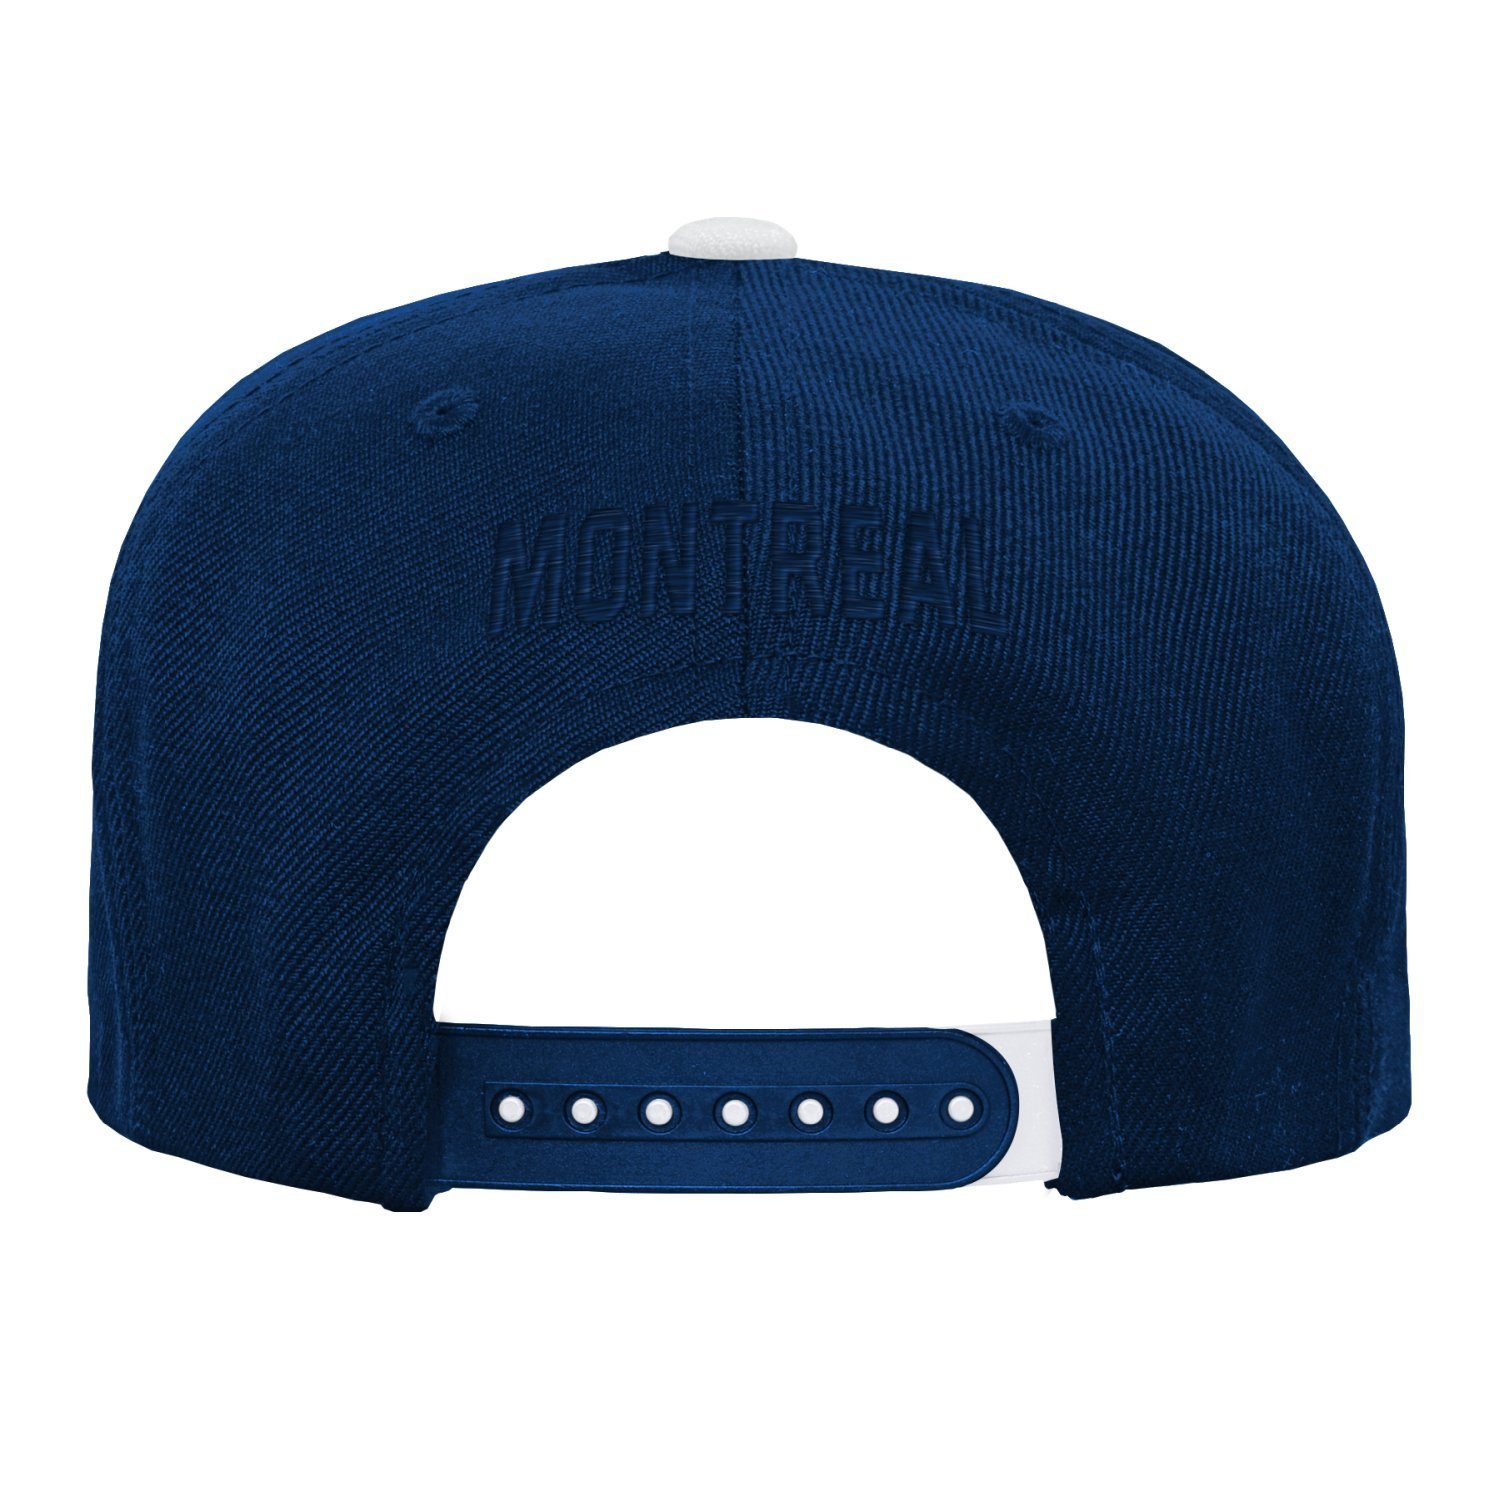 FACEOFF Cap Outerstuff Montreal Canadiens Baseball Outerstuff